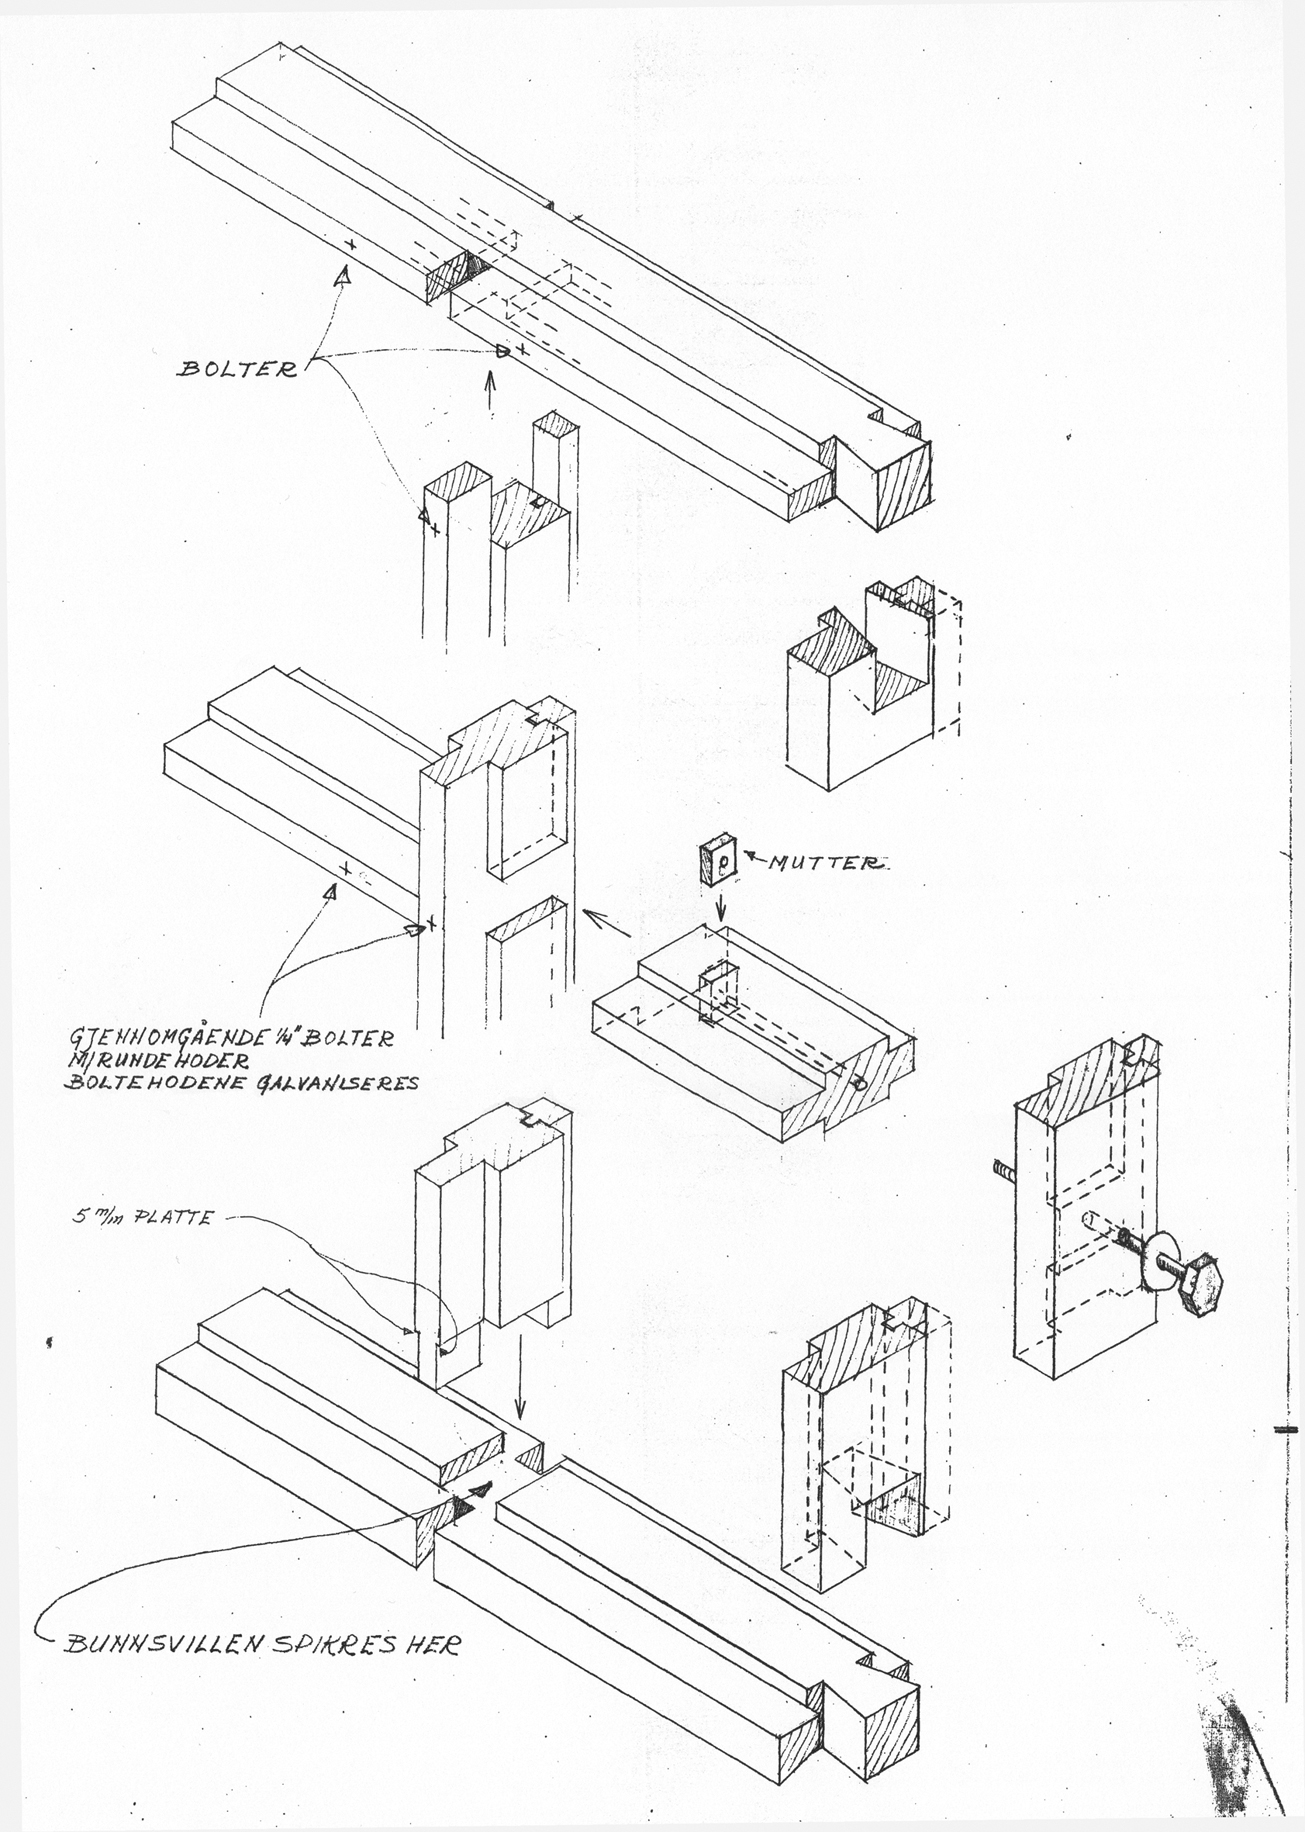 Detail of the construction documents for Norberg-Schulz and Korsmo’s Planetveien houses specifying to the carpenters how the intricate joinery of the wooden structure was to be hewn and assembled.